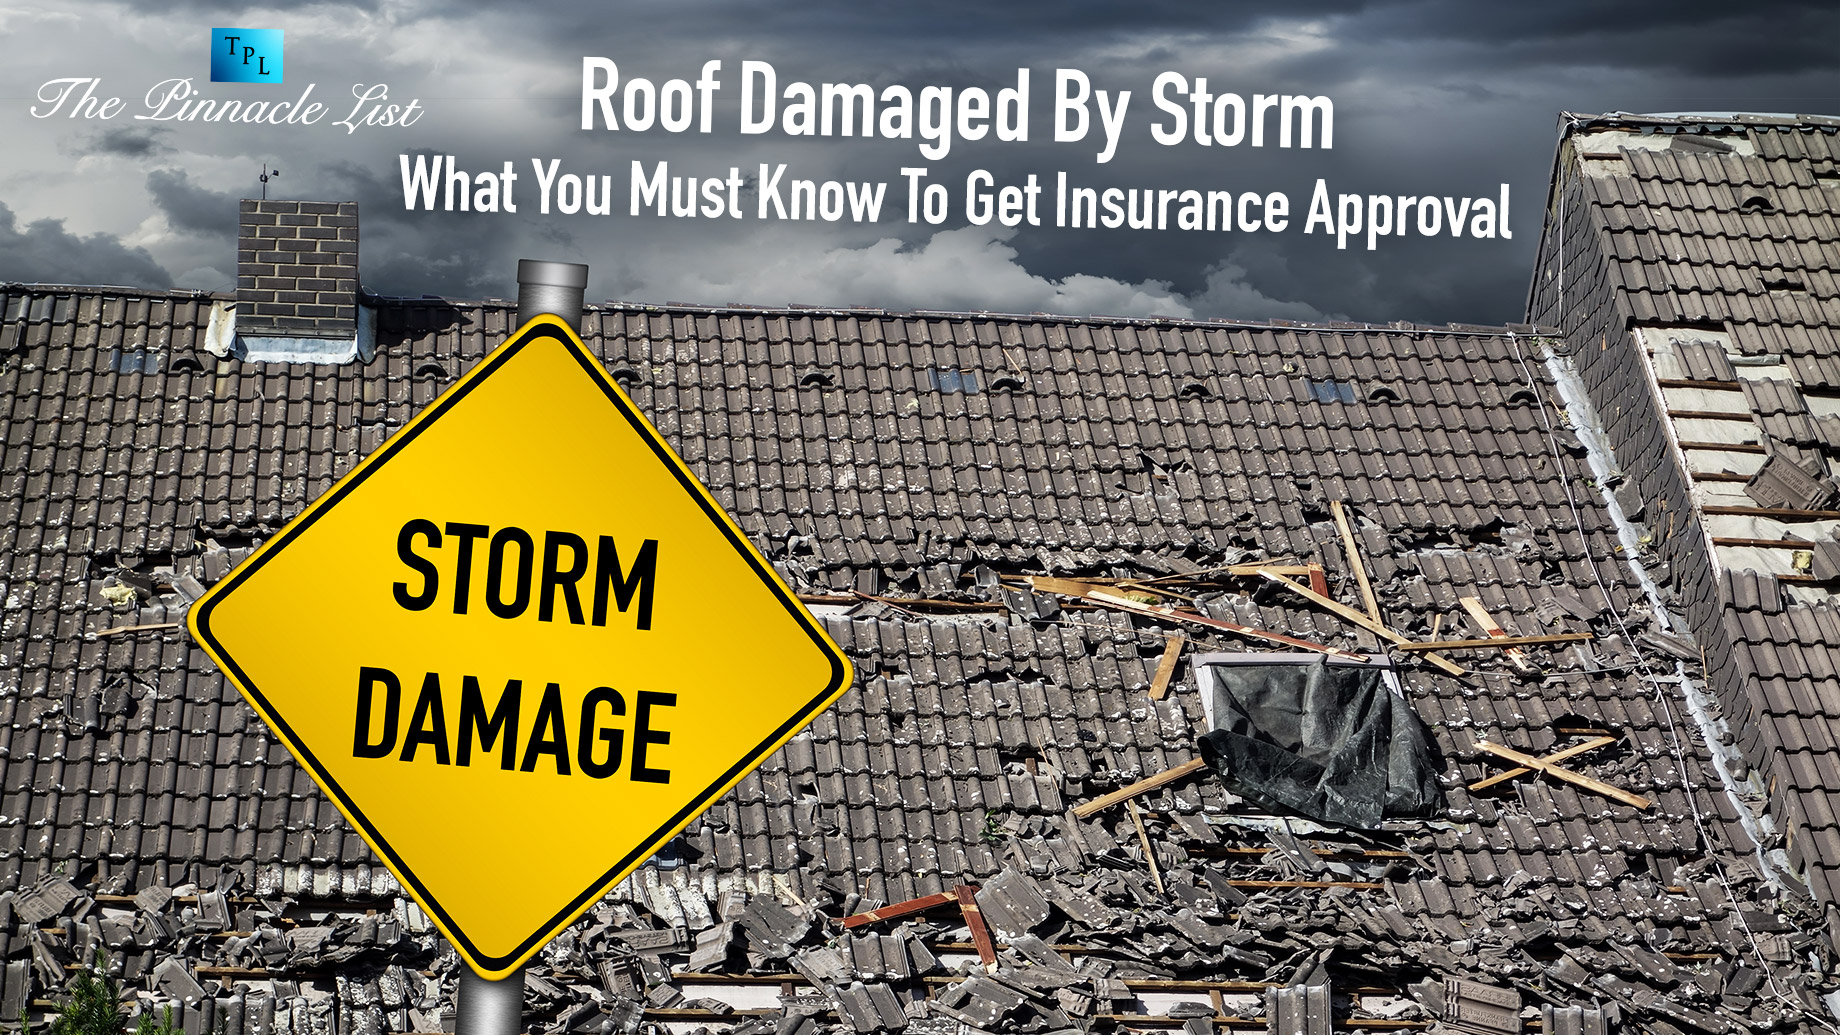 Roof Damaged By Storm - What You Must Know To Get Insurance Approval